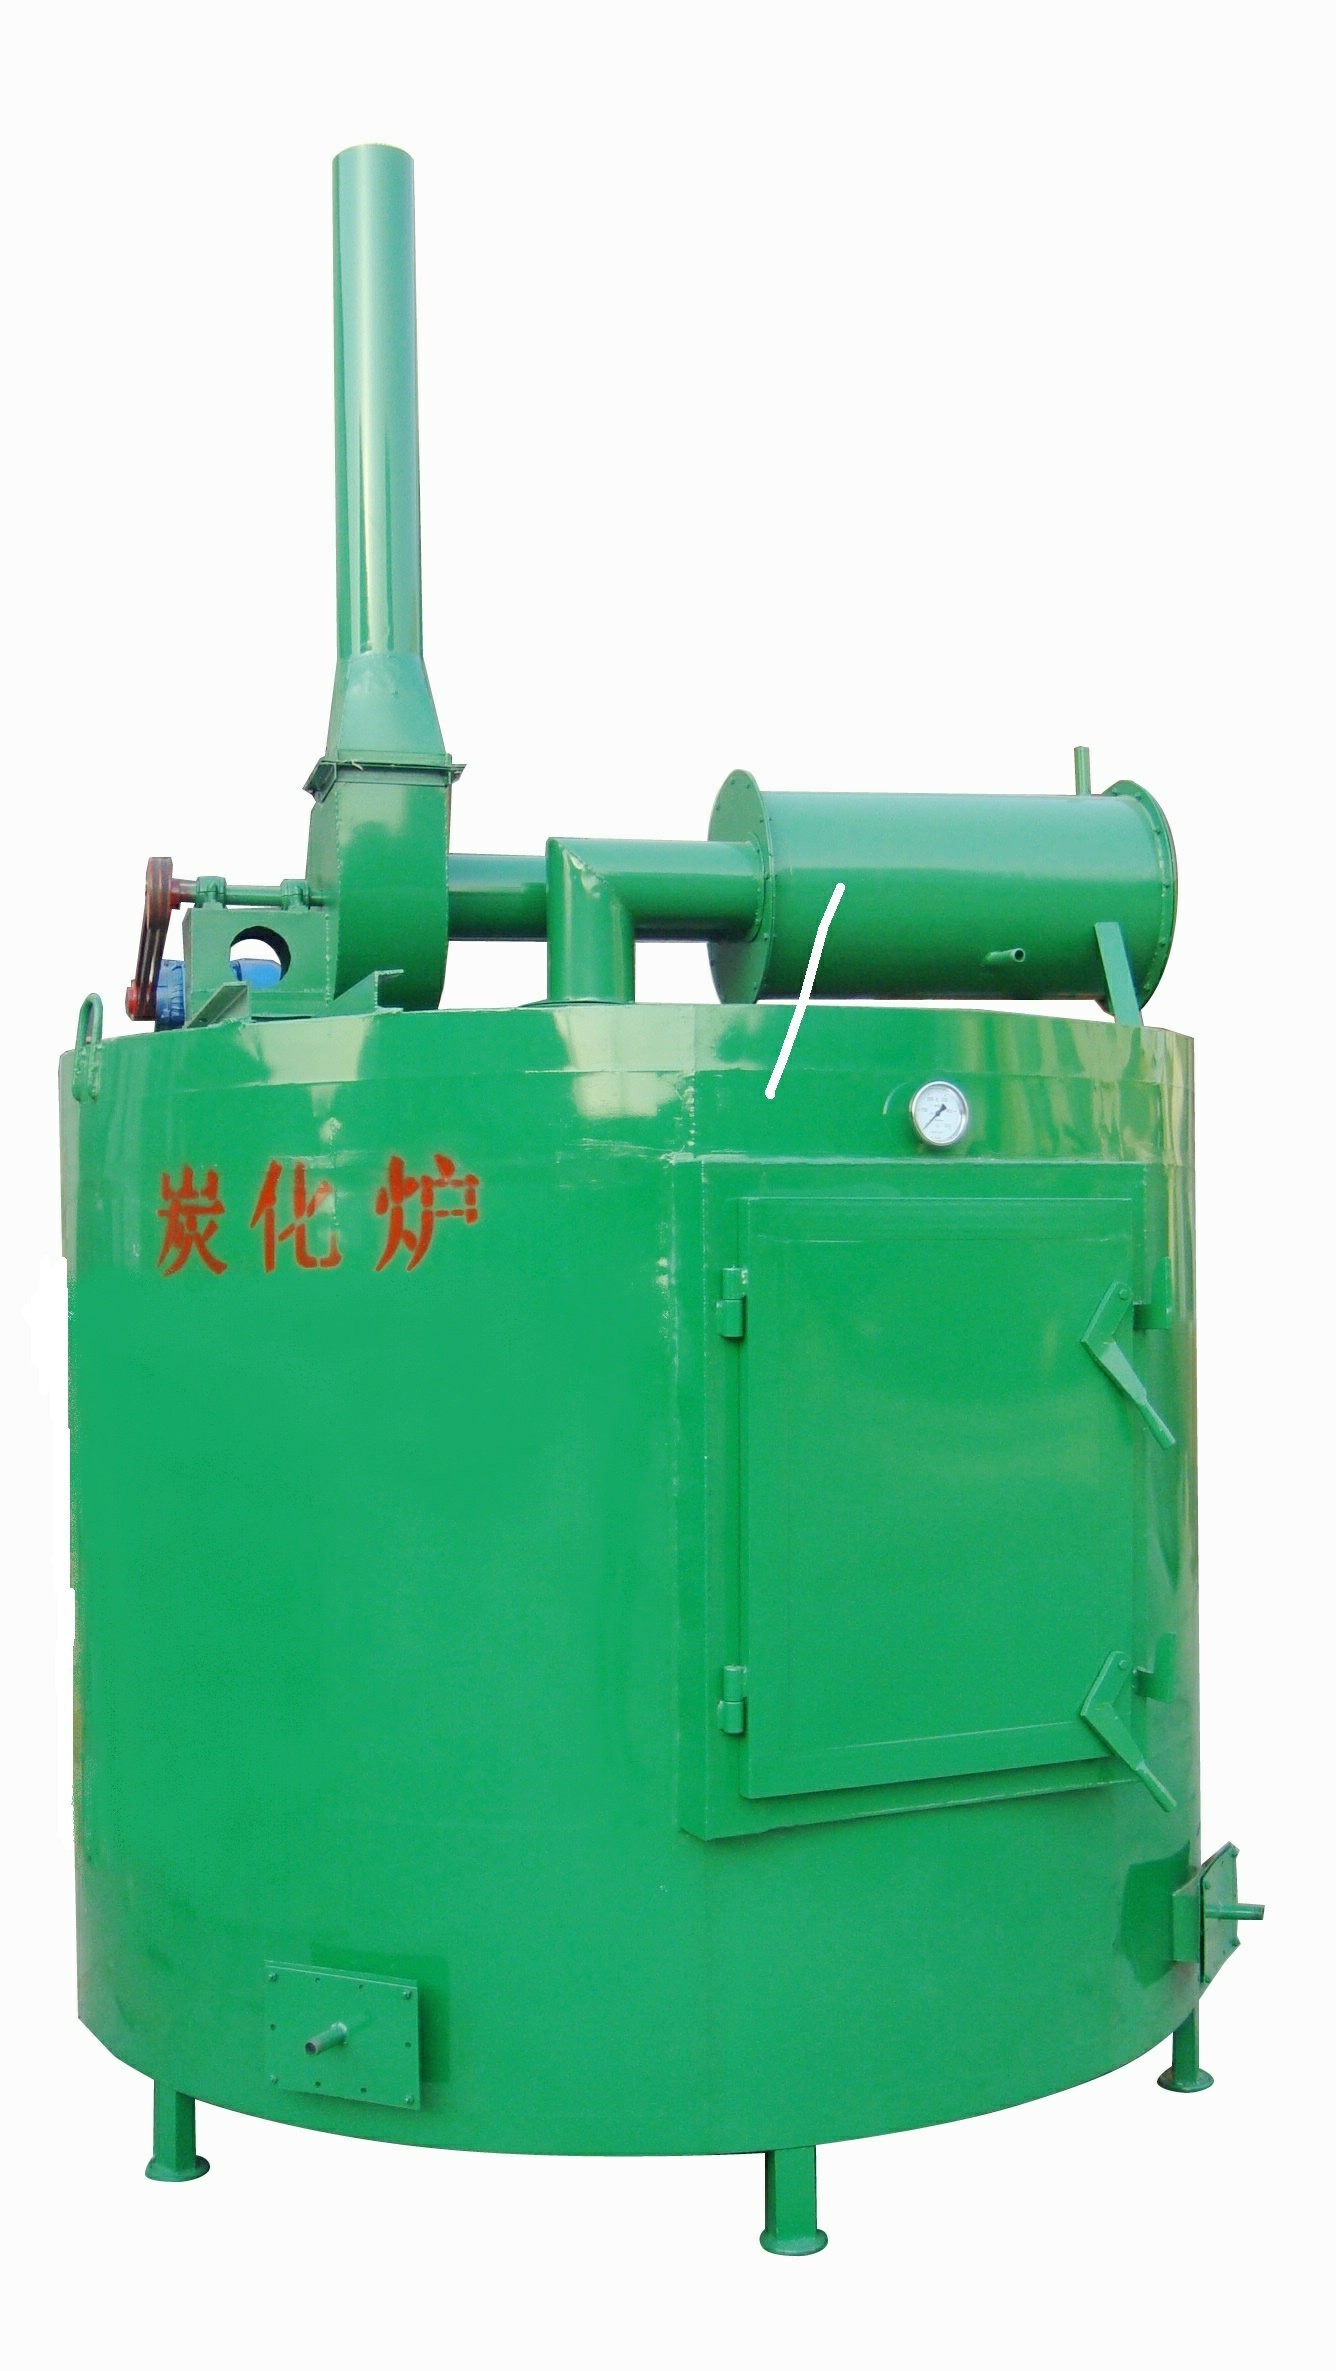 Round Spontaneous combustion type Carbonization furnace